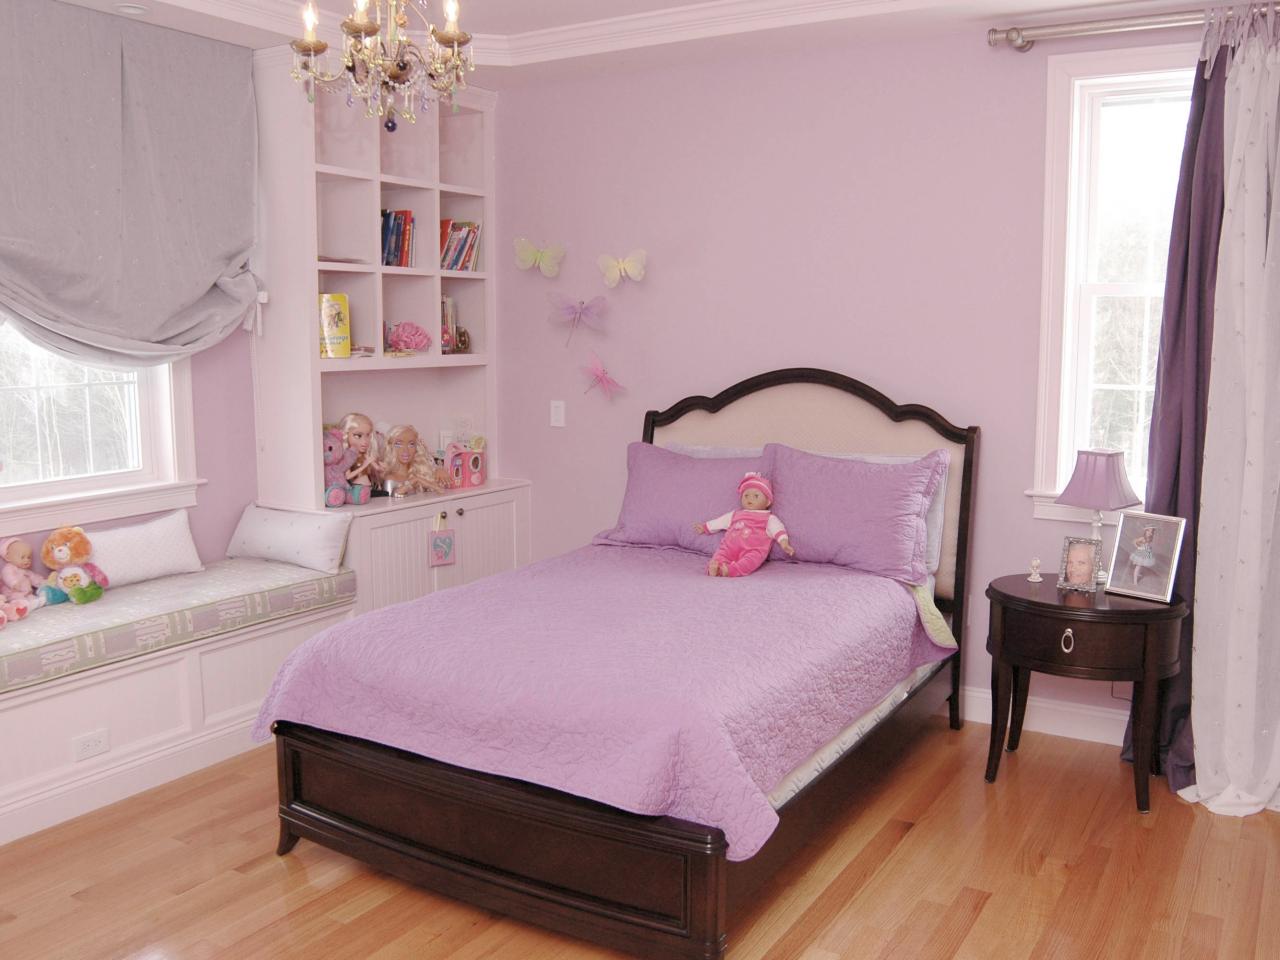 Transitional Purple Girl's Bedroom With Window Seat | HGTV